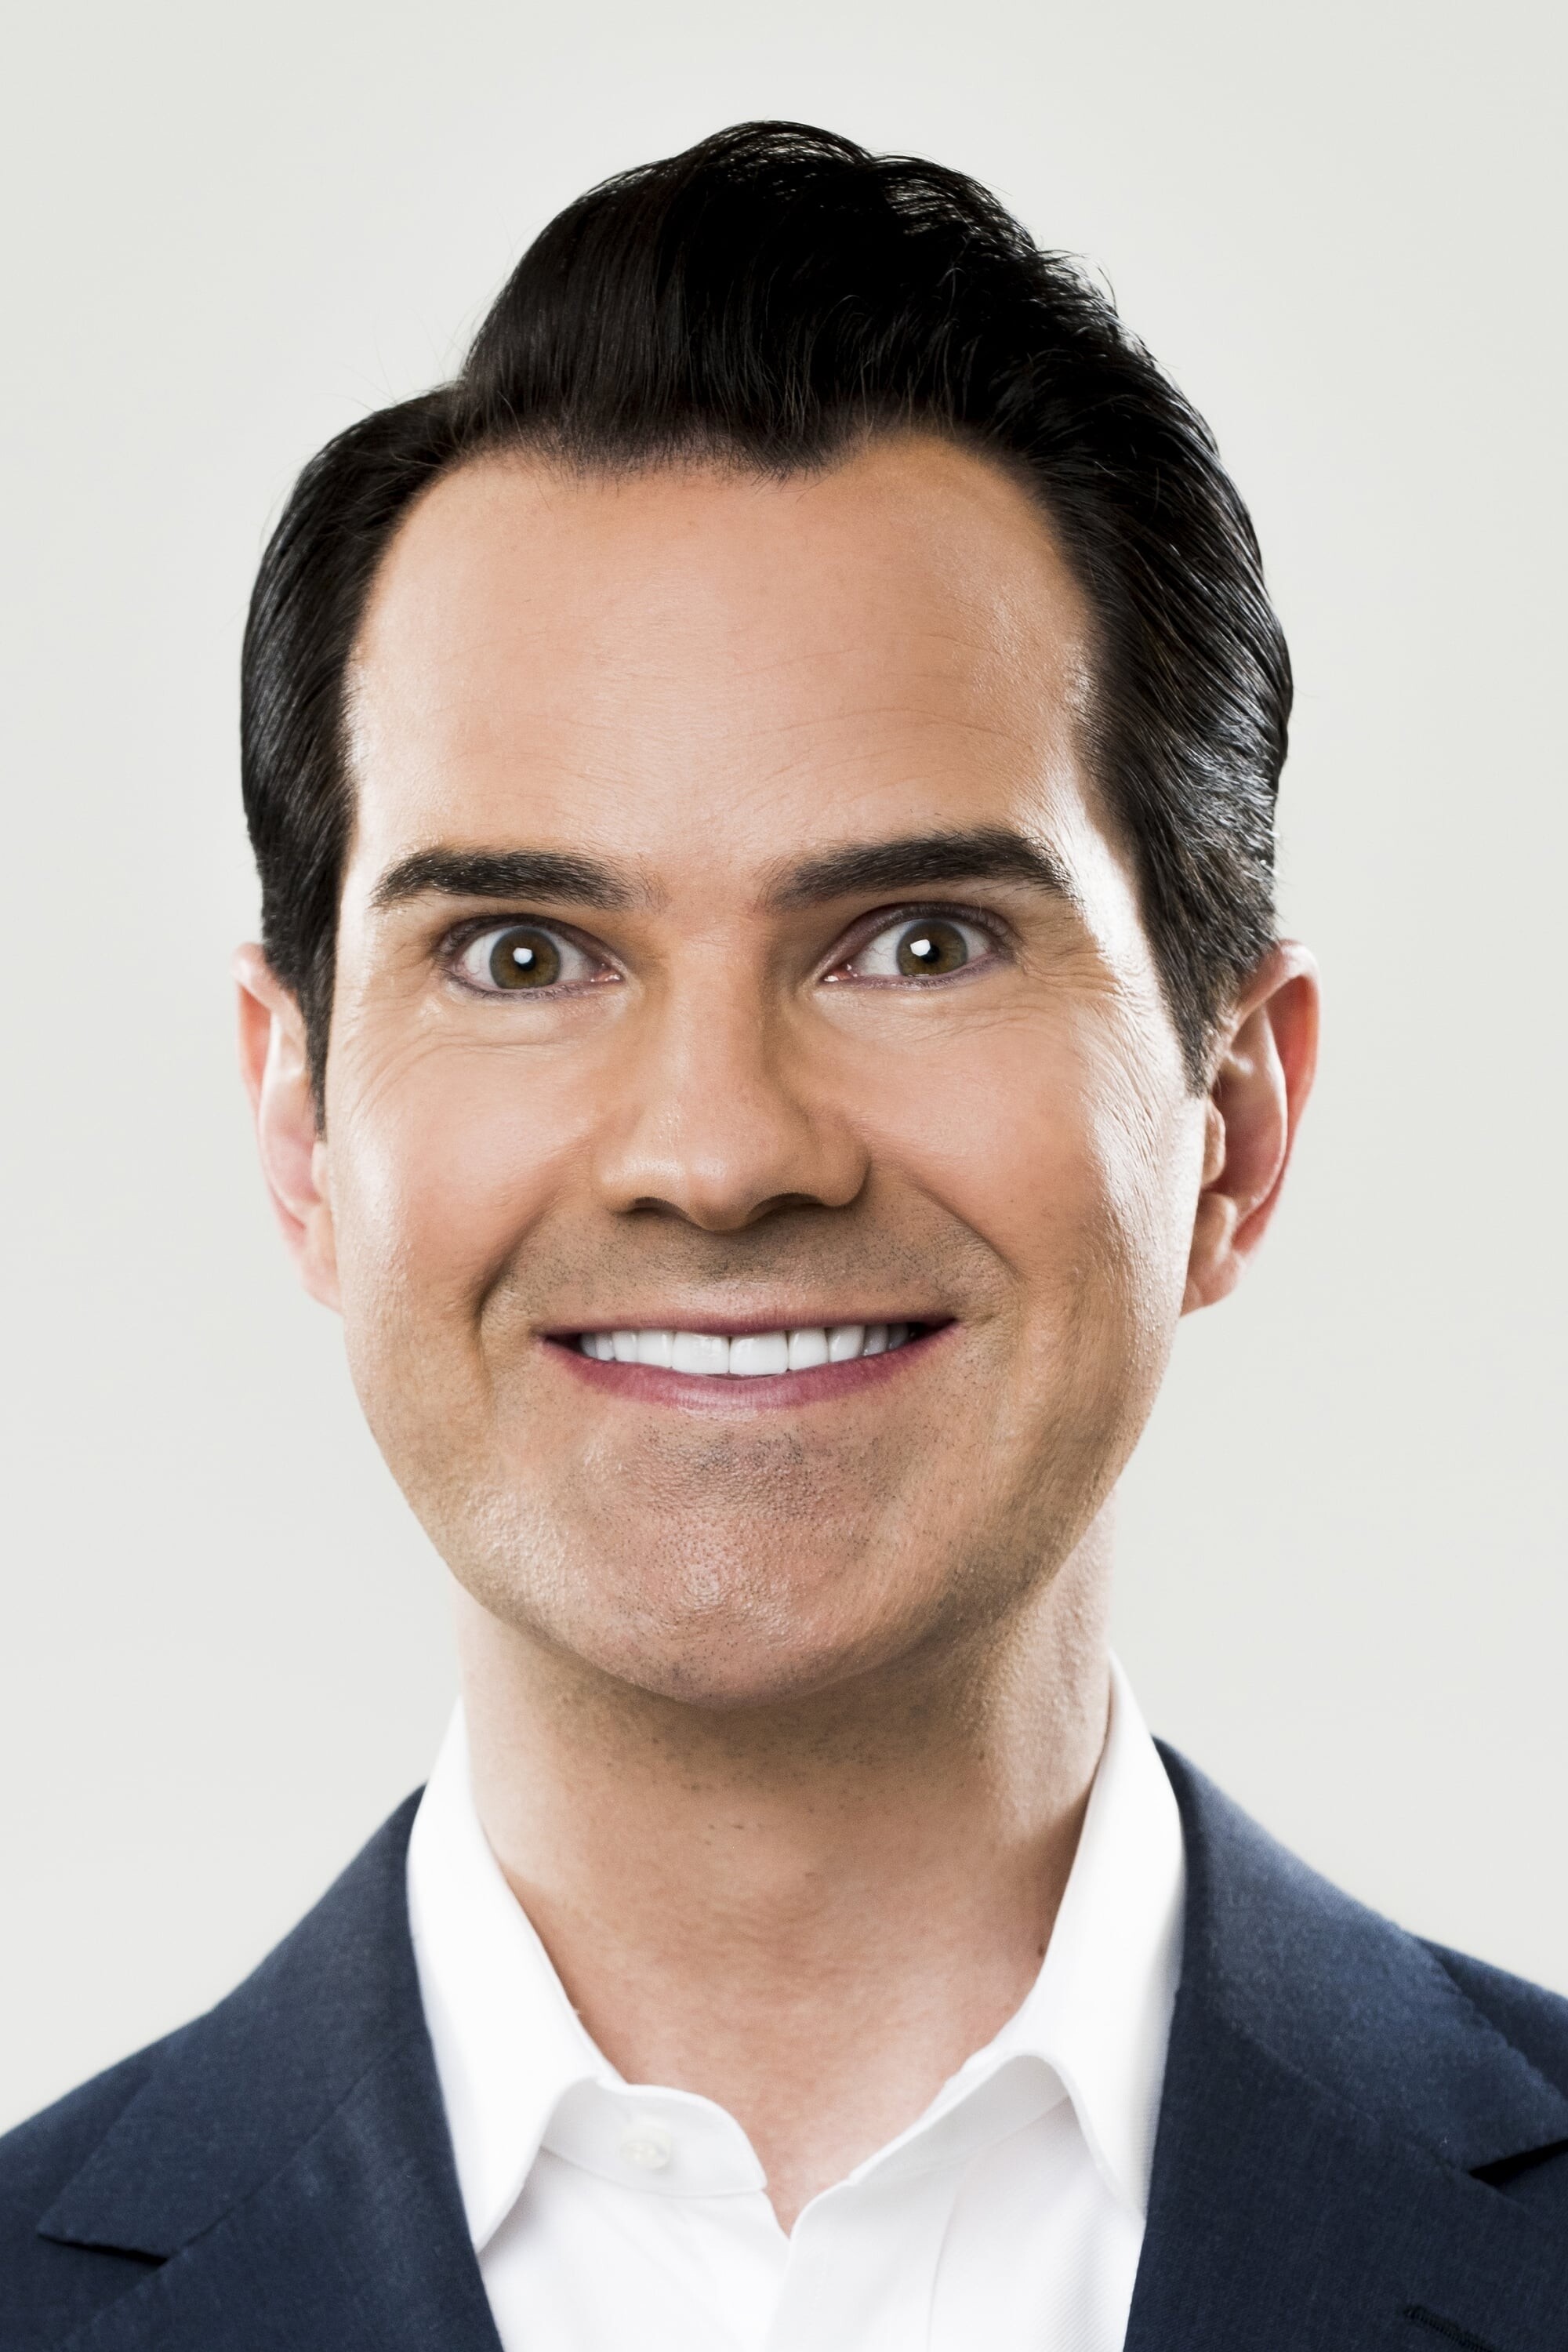 Jimmy Carr: Jimmy, One of the biggest selling live acts in UK comedy, Performing to sell-out crowds across the country. 2000x3000 HD Wallpaper.